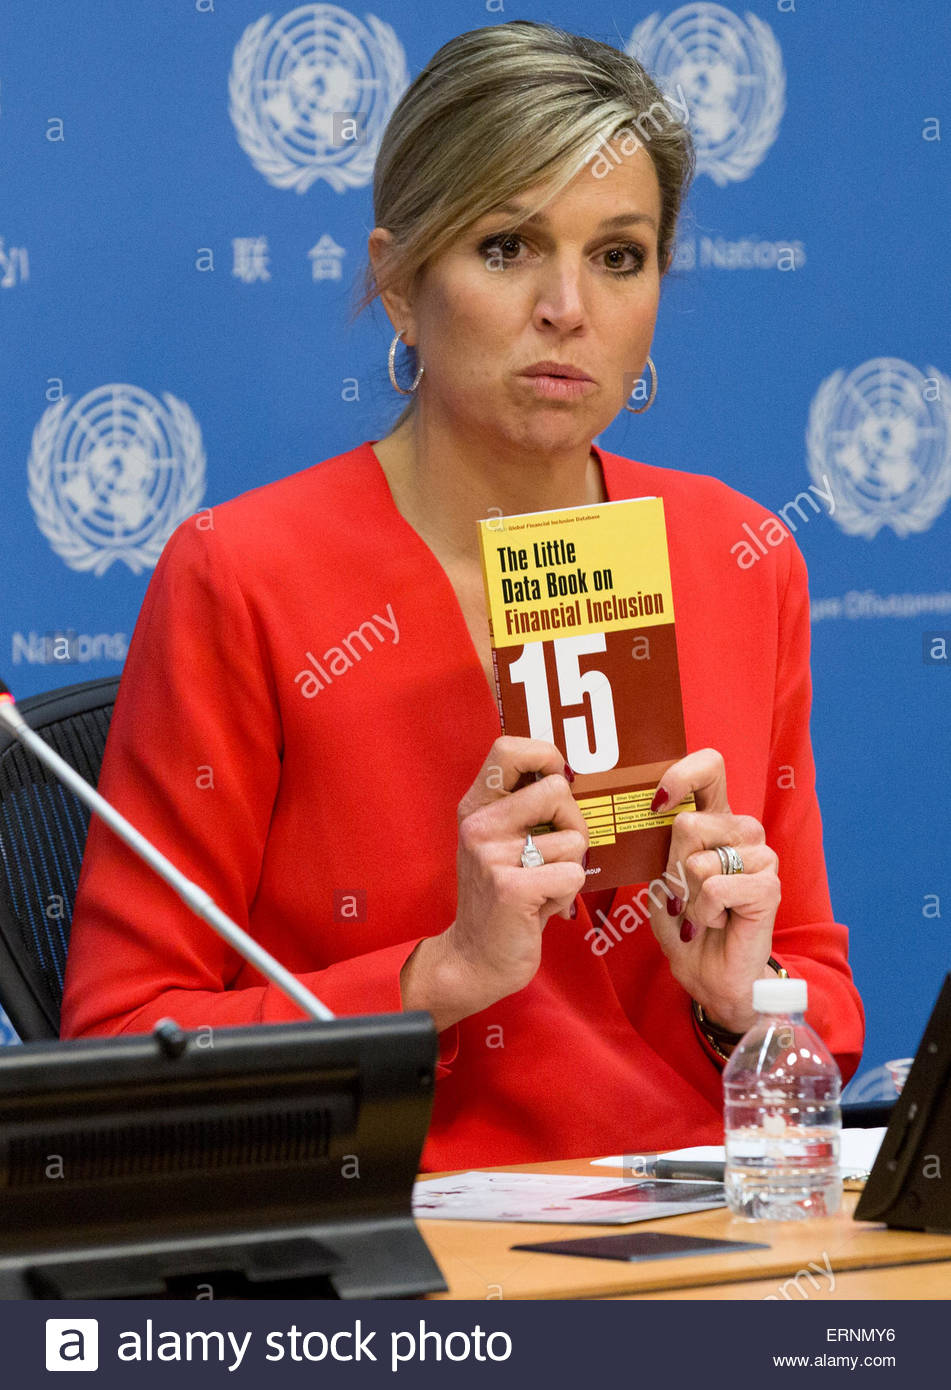 united-nations-new-york-usa-june-05-2015-queen-maxima-of-the-netherlands-ERNMY6.jpg